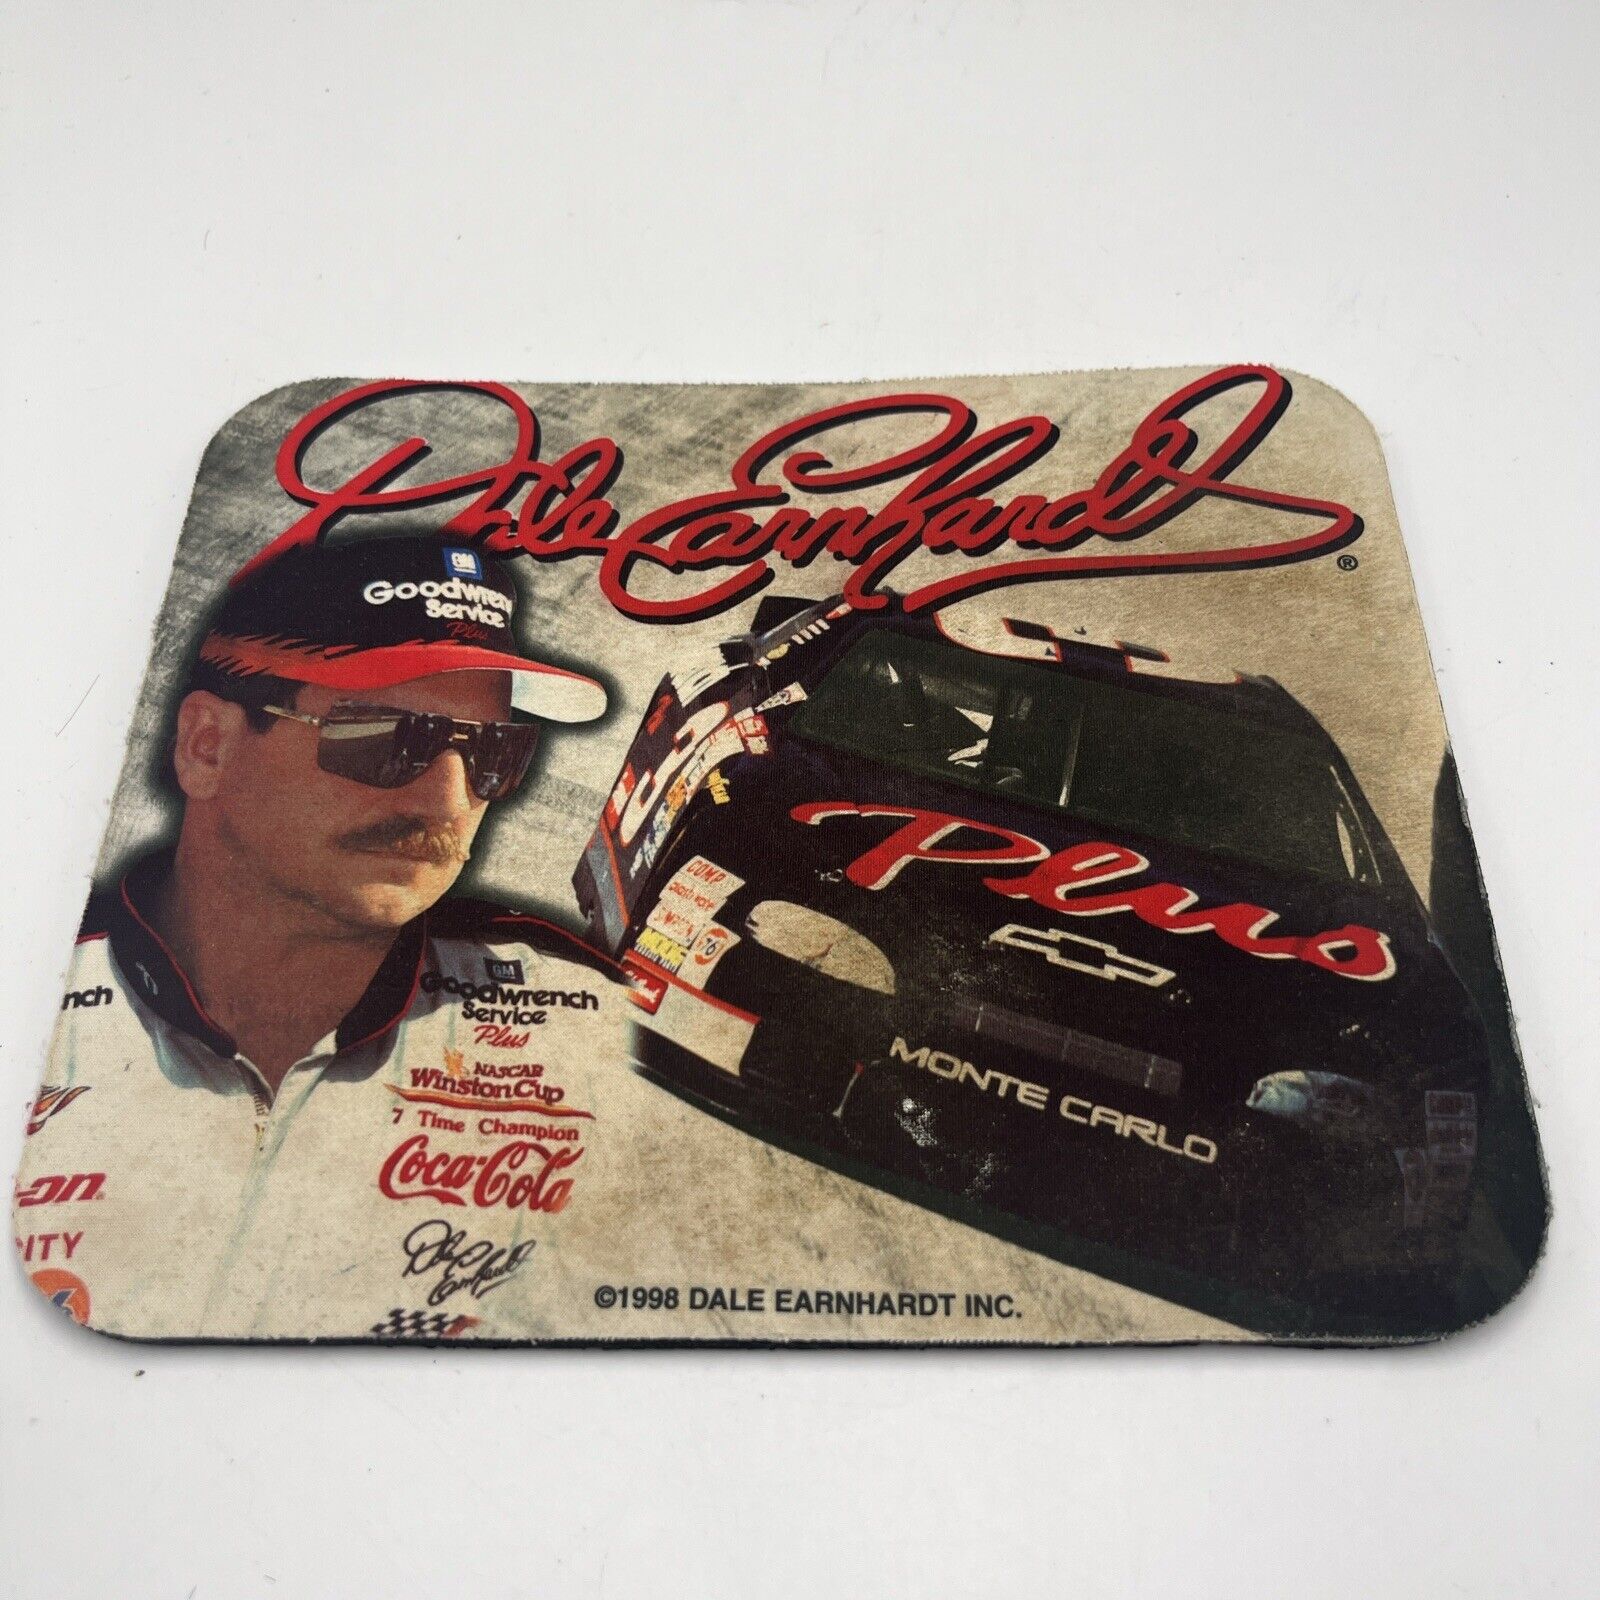 Vintage 1998 NASCAR Dale Earnhardt  Mouse Pad Brand Winston Cup Series -NO TEARS